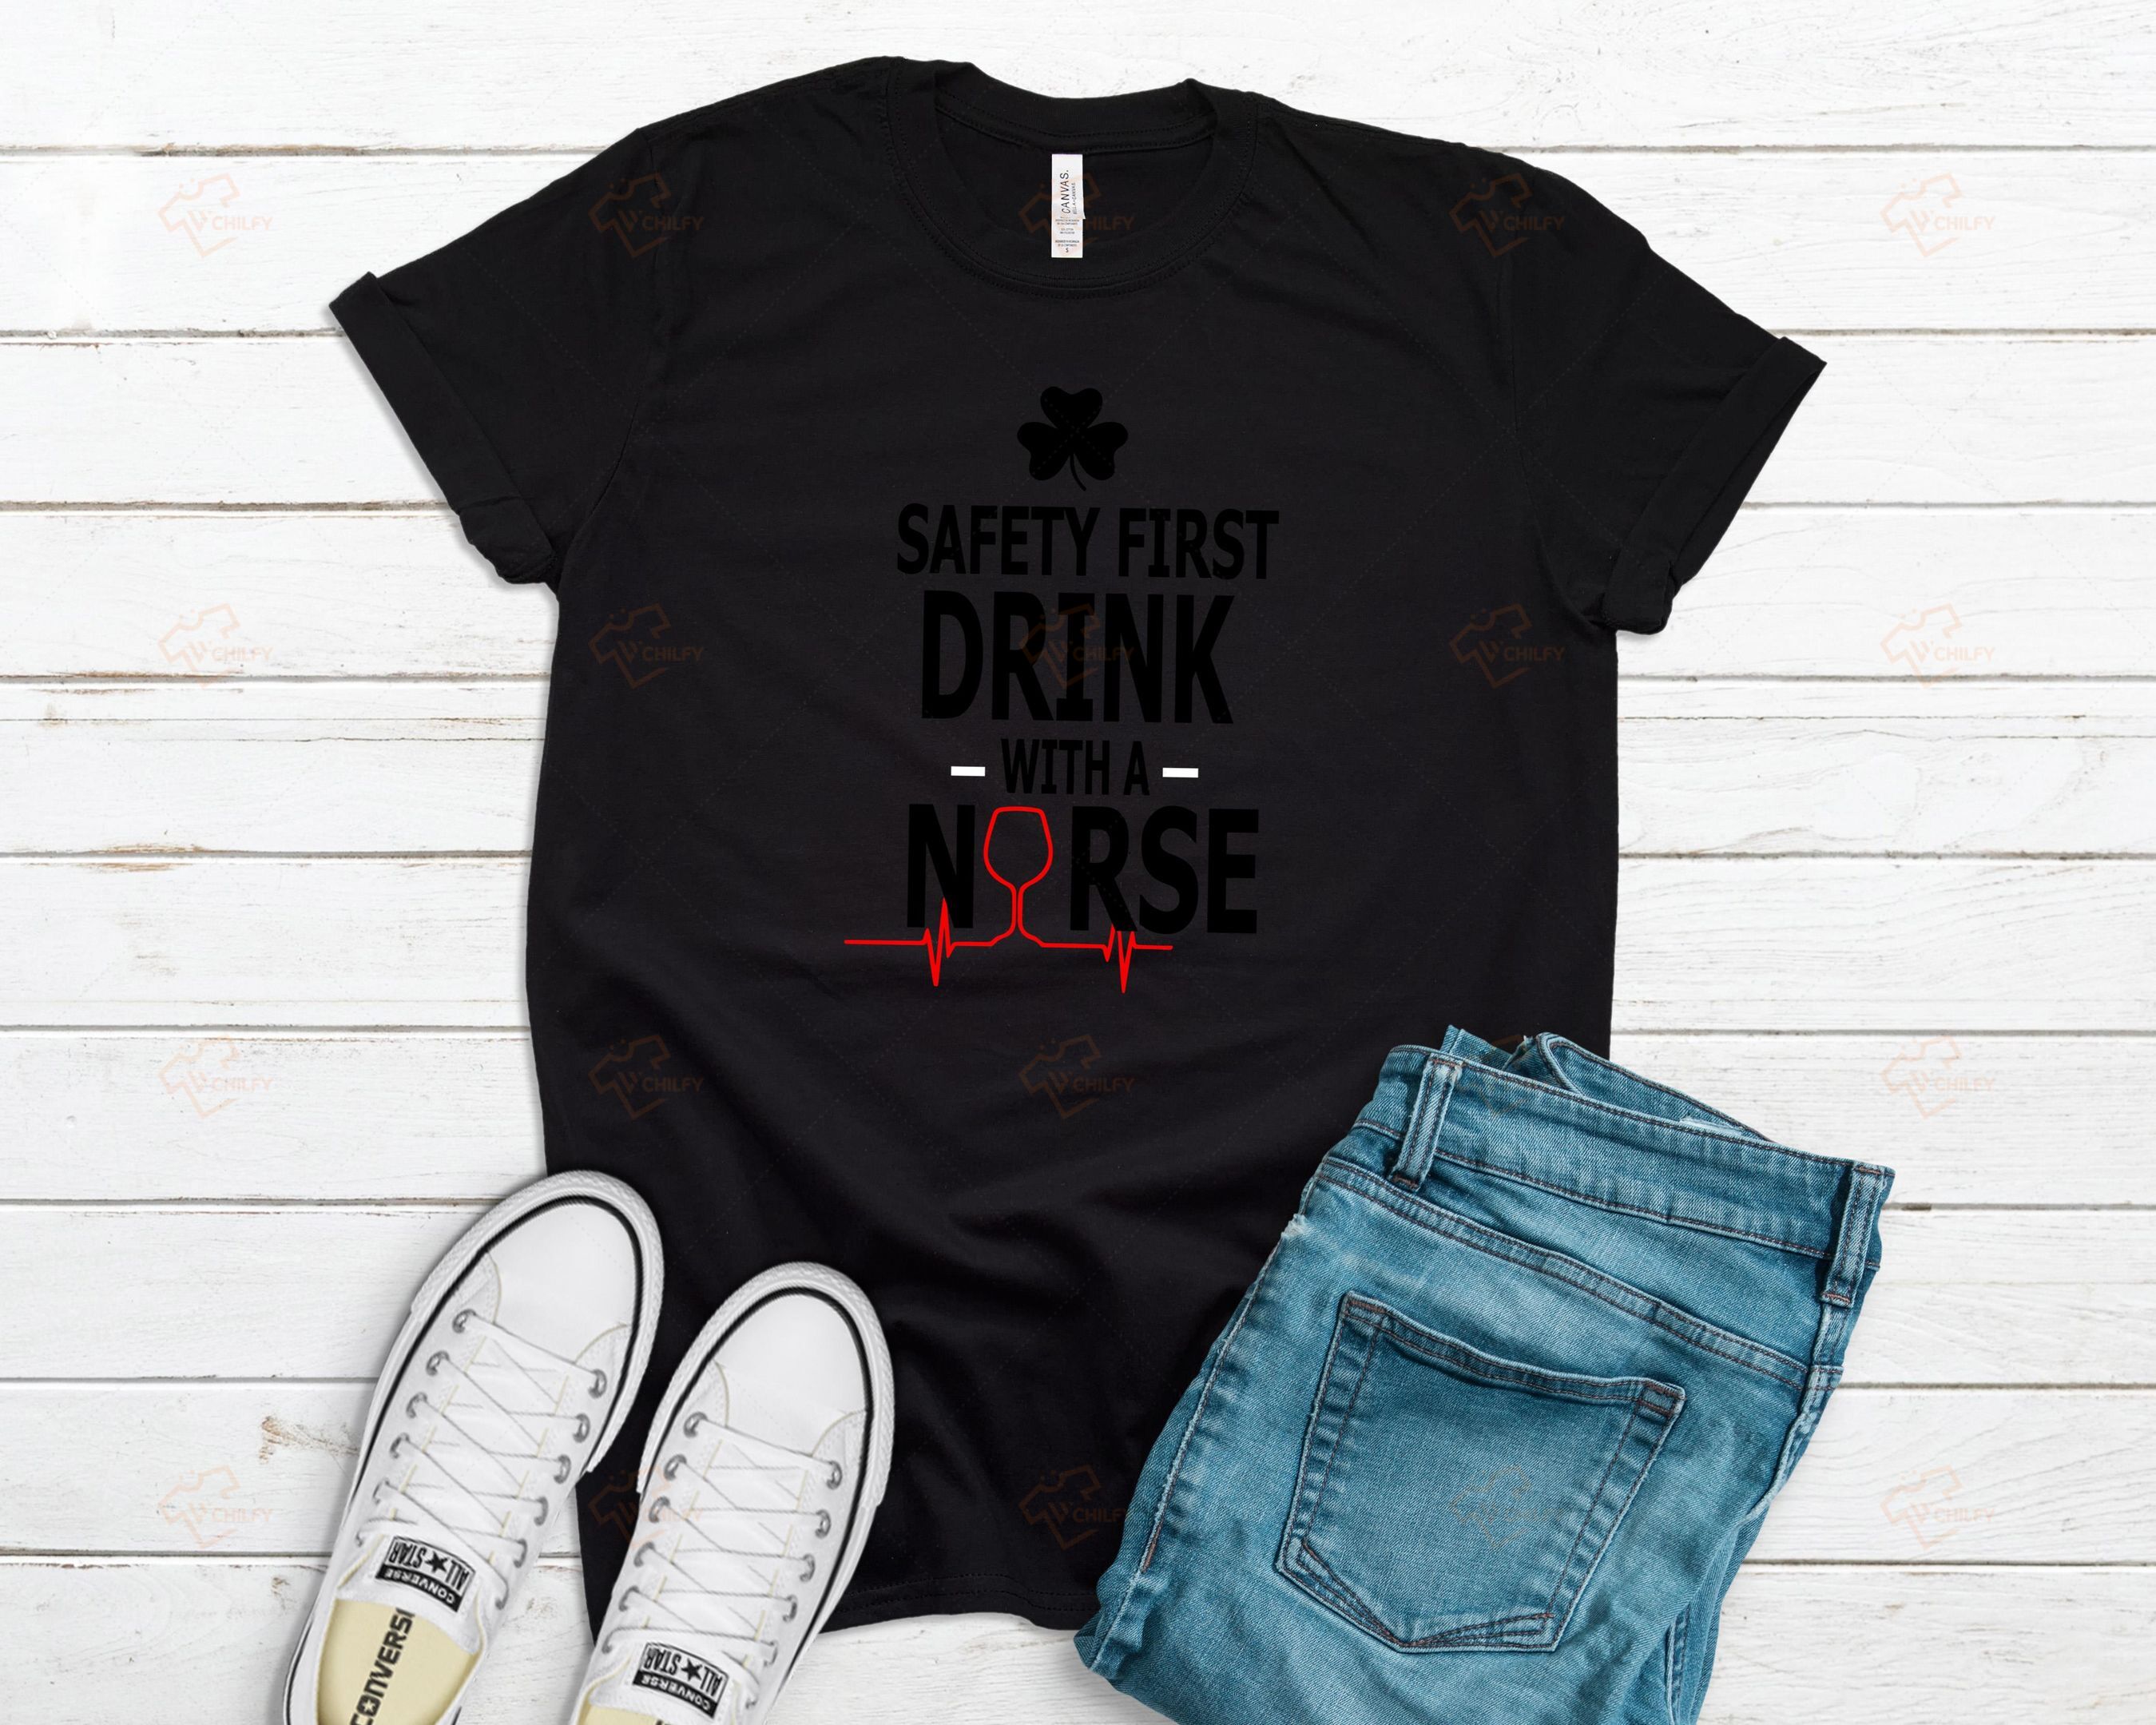 Safety First Drink With A Nurse Shirt, Funny Nurse Shirt, RN Shirt, Gift For Nurse, Nurse Gift